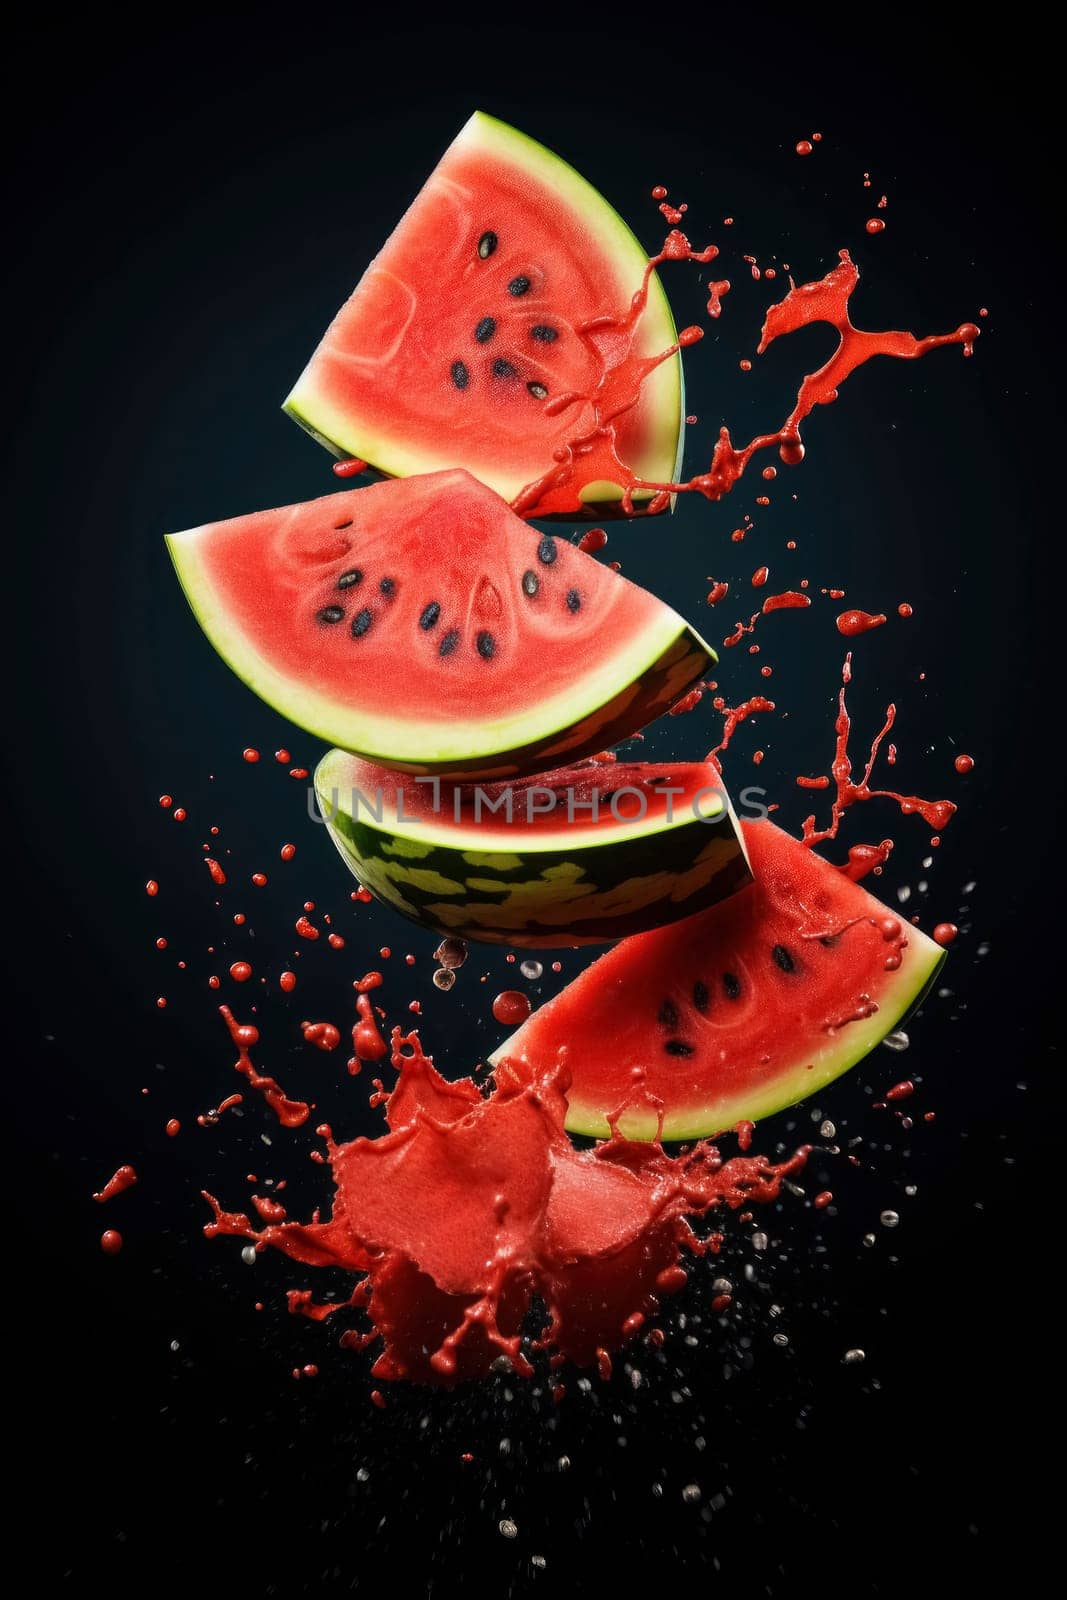 Watermelon slices exploding with a vibrant splash of juice against a dark background, capturing a moment of freshness.